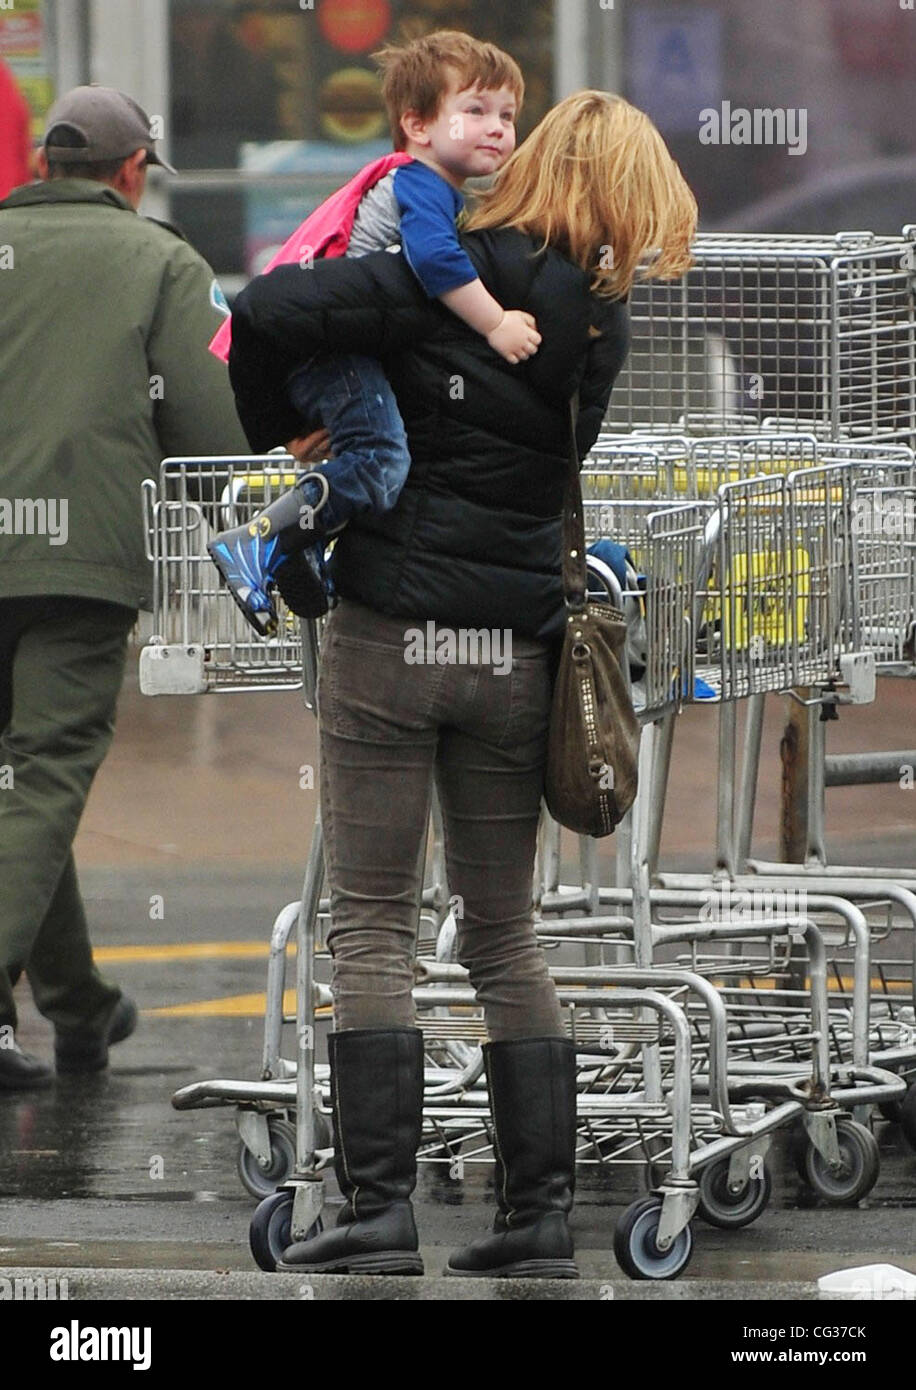 Courtney Thorne-Smith and her son, Jacob, shopping for groceries in Brentwood Brentwood, Los Angeles, 19.12.10 Stock Photo